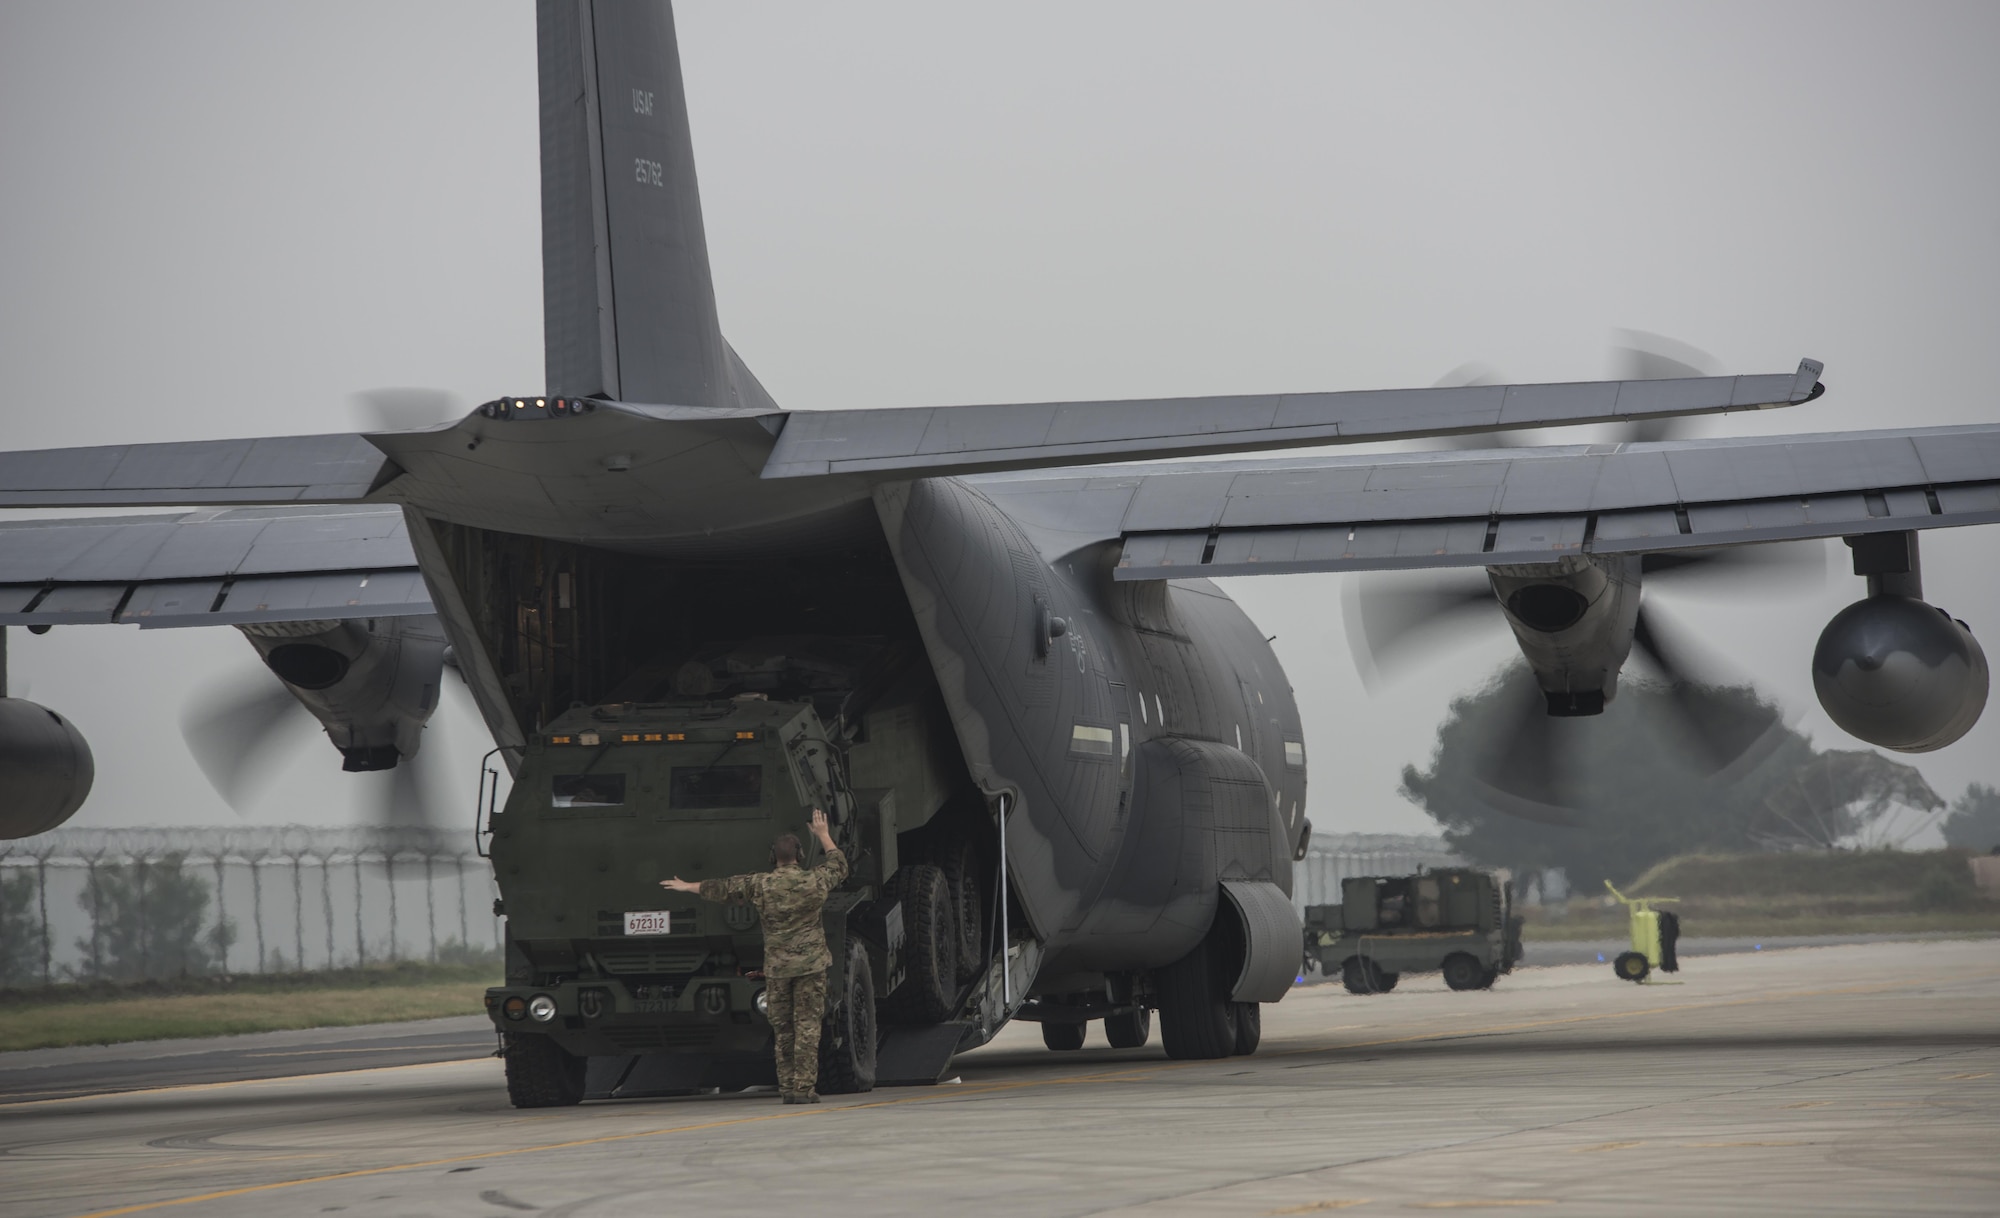 A U.S. Marine Corps High Mobility Artillery Rocket System (HIMARS) assigned to 12th Marine Regiment, 3rd Marine Division loads onto a U.S. Air Force Special Operations Command MC-130J Commando II assigned to the 353rd Special Operations Group following a readiness drill, June 1, 2017 at Kunsan Air Base, Republic of Korea. The tactical level exchanges and realistic scenario-based mission executed during the joint training exercise increased interoperability and partner capacity with between the U.S Air Force and Marine Corps. (U.S. Air Force photo by Capt. Jessica Tait)